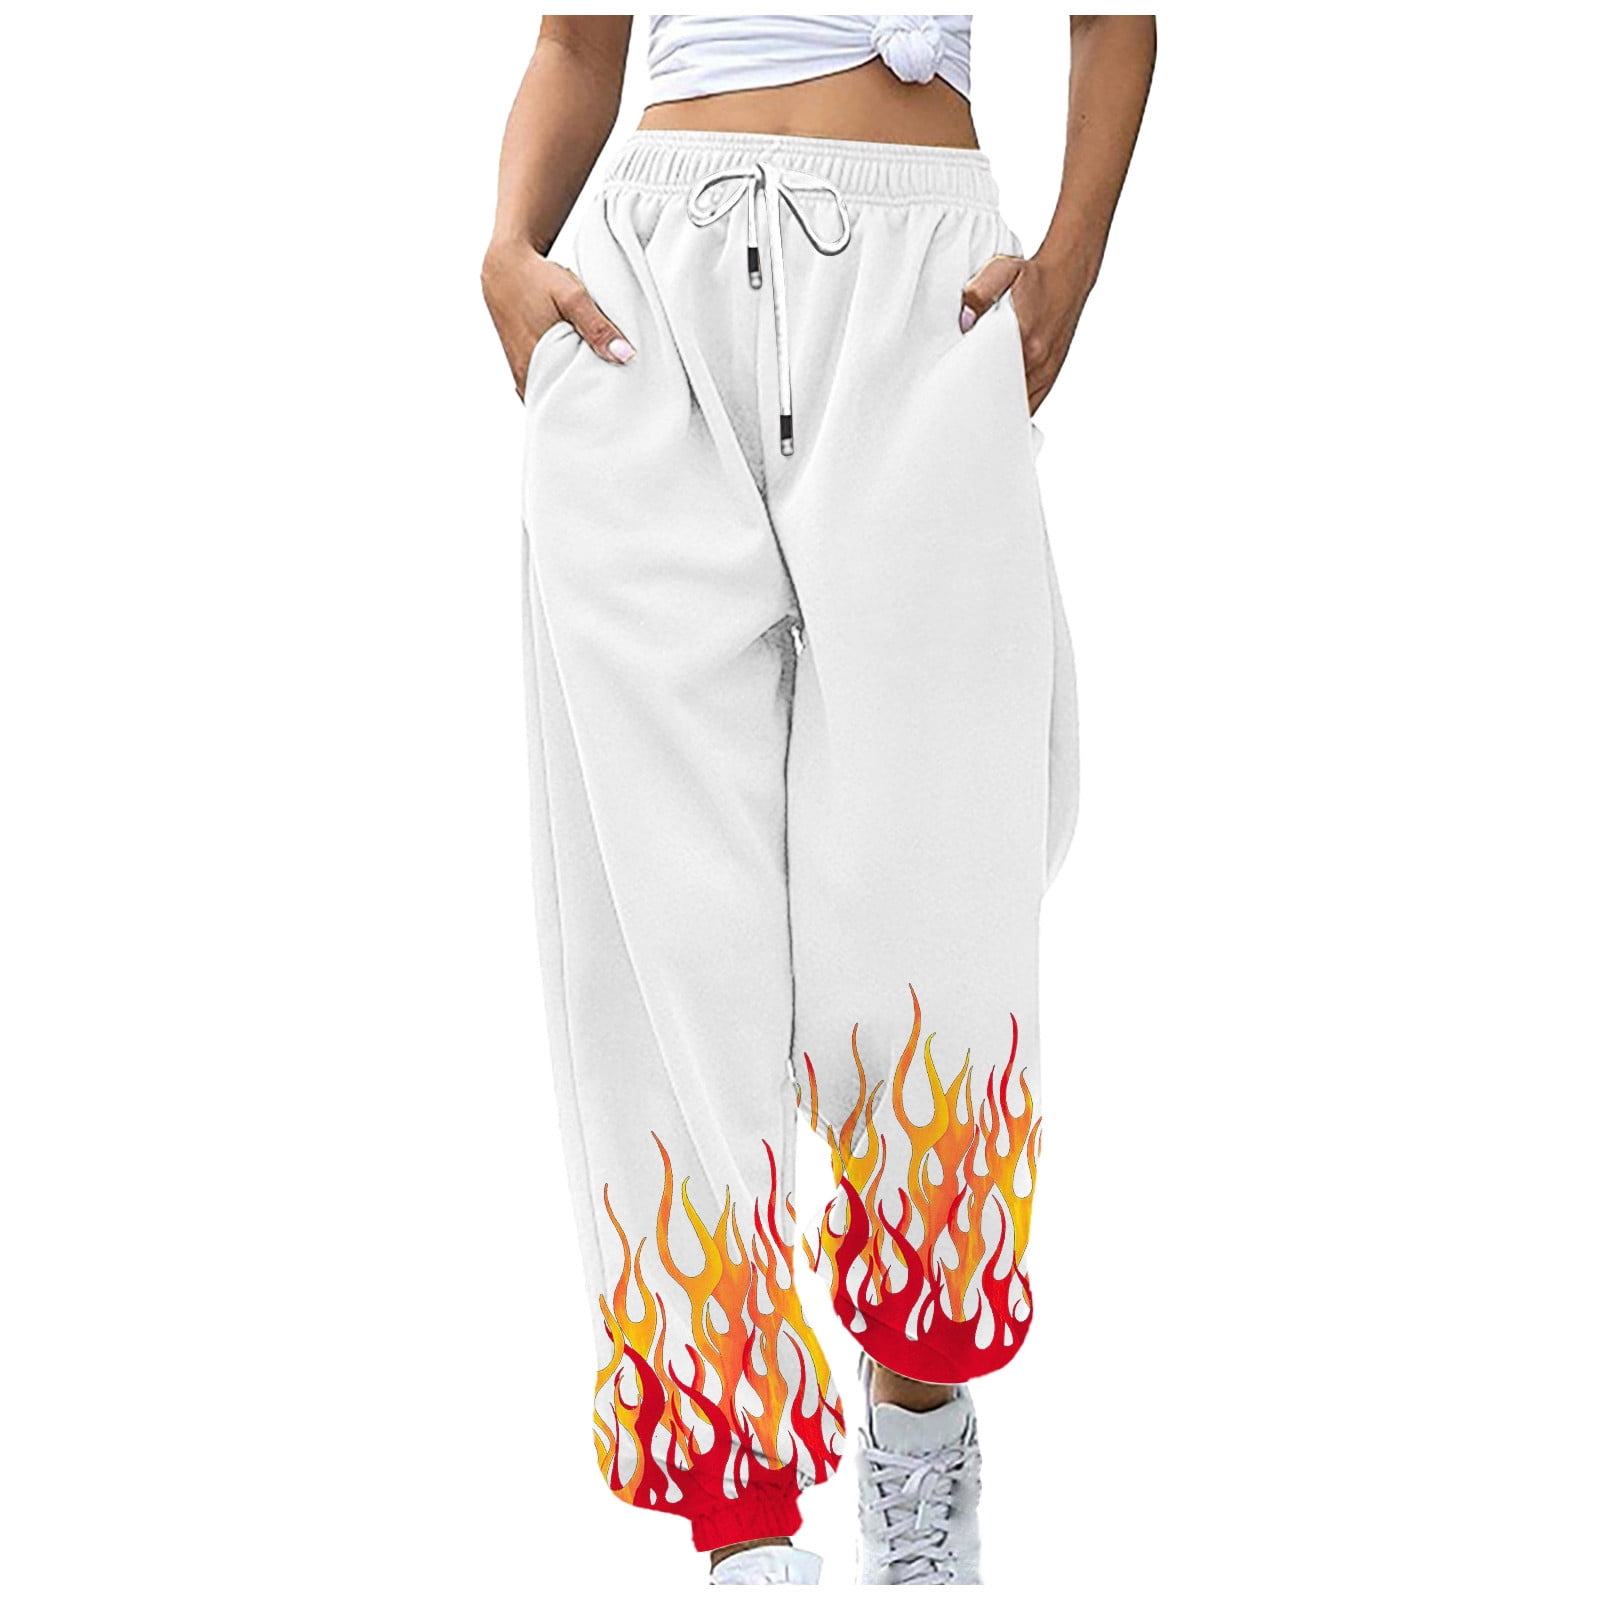 BUIgtTklOP Pants For Women Clearance Womens Flame Printing